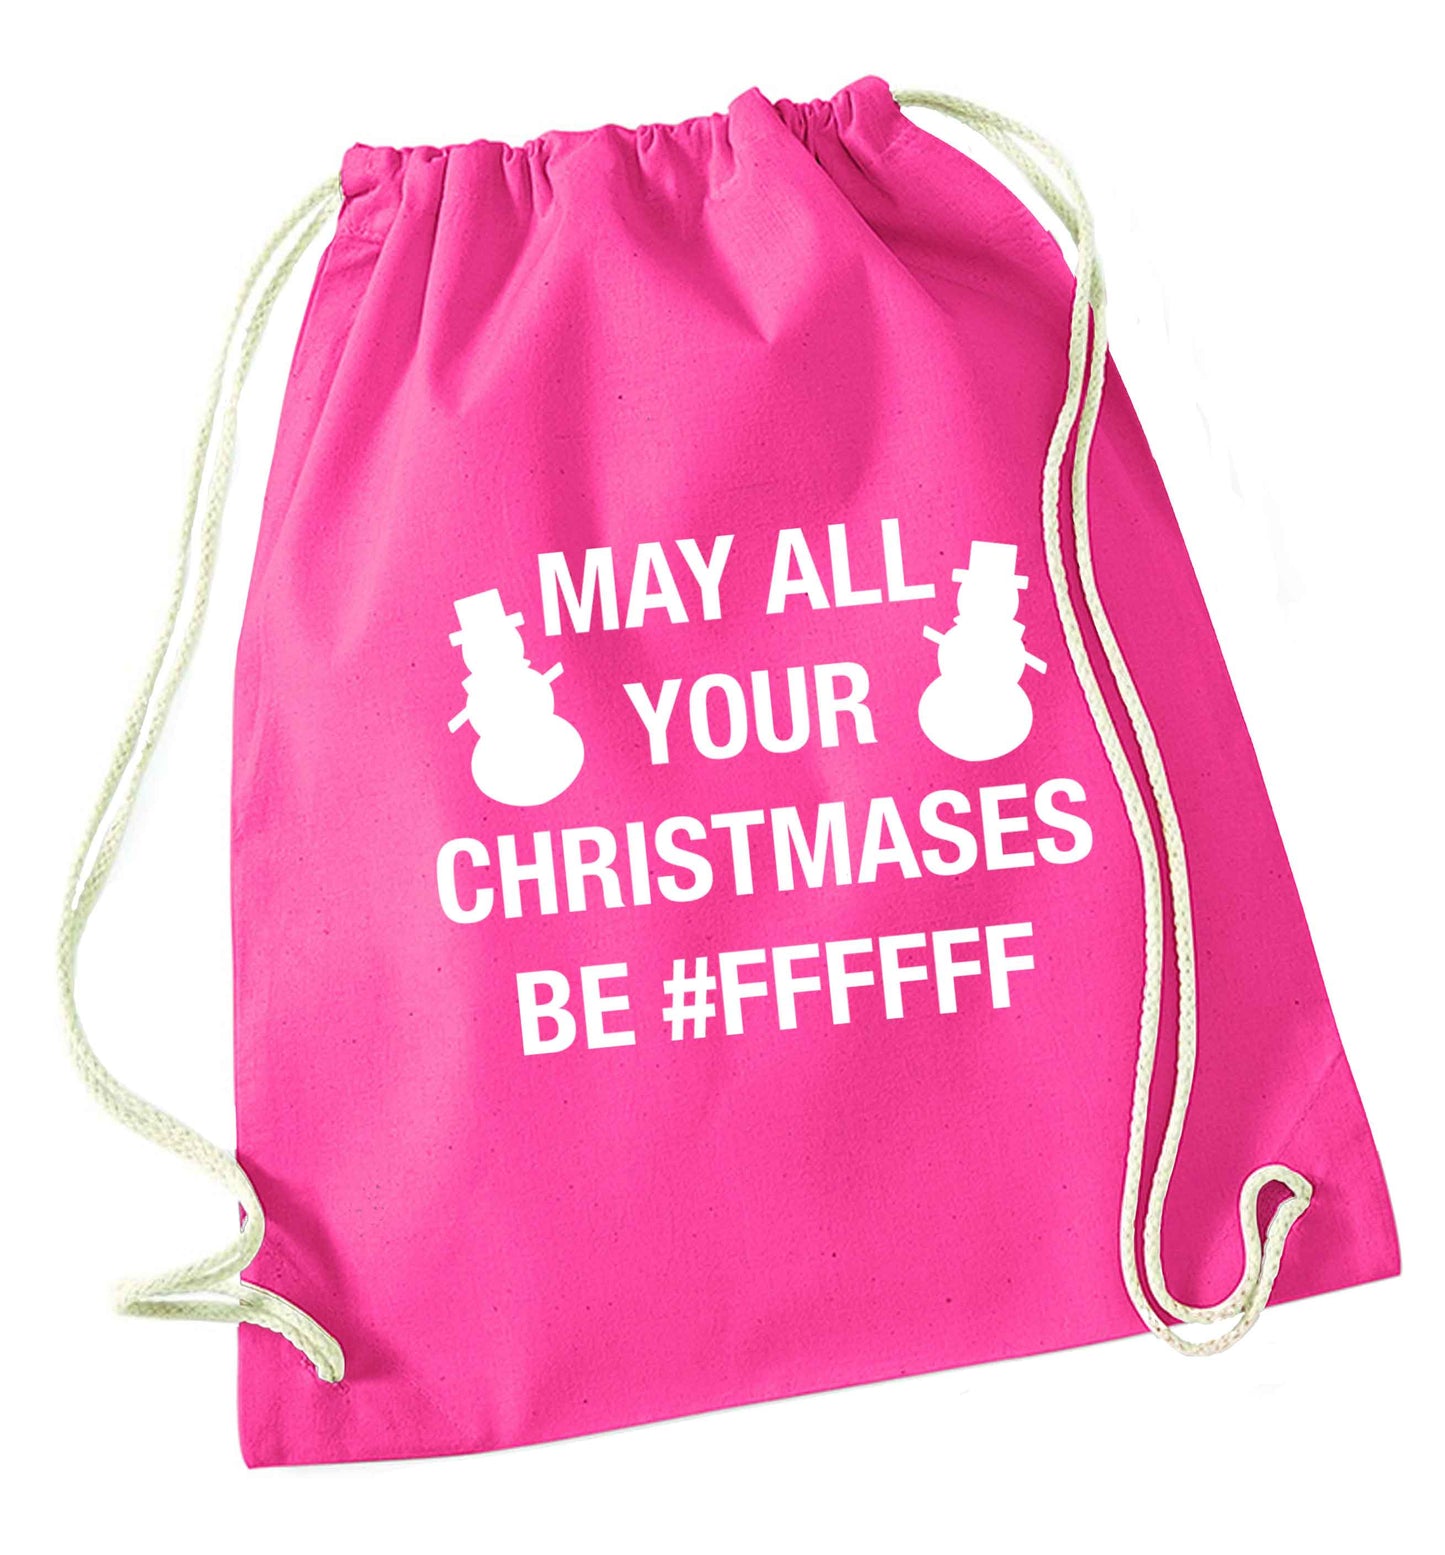 May all your Christmases be #FFFFFF pink drawstring bag